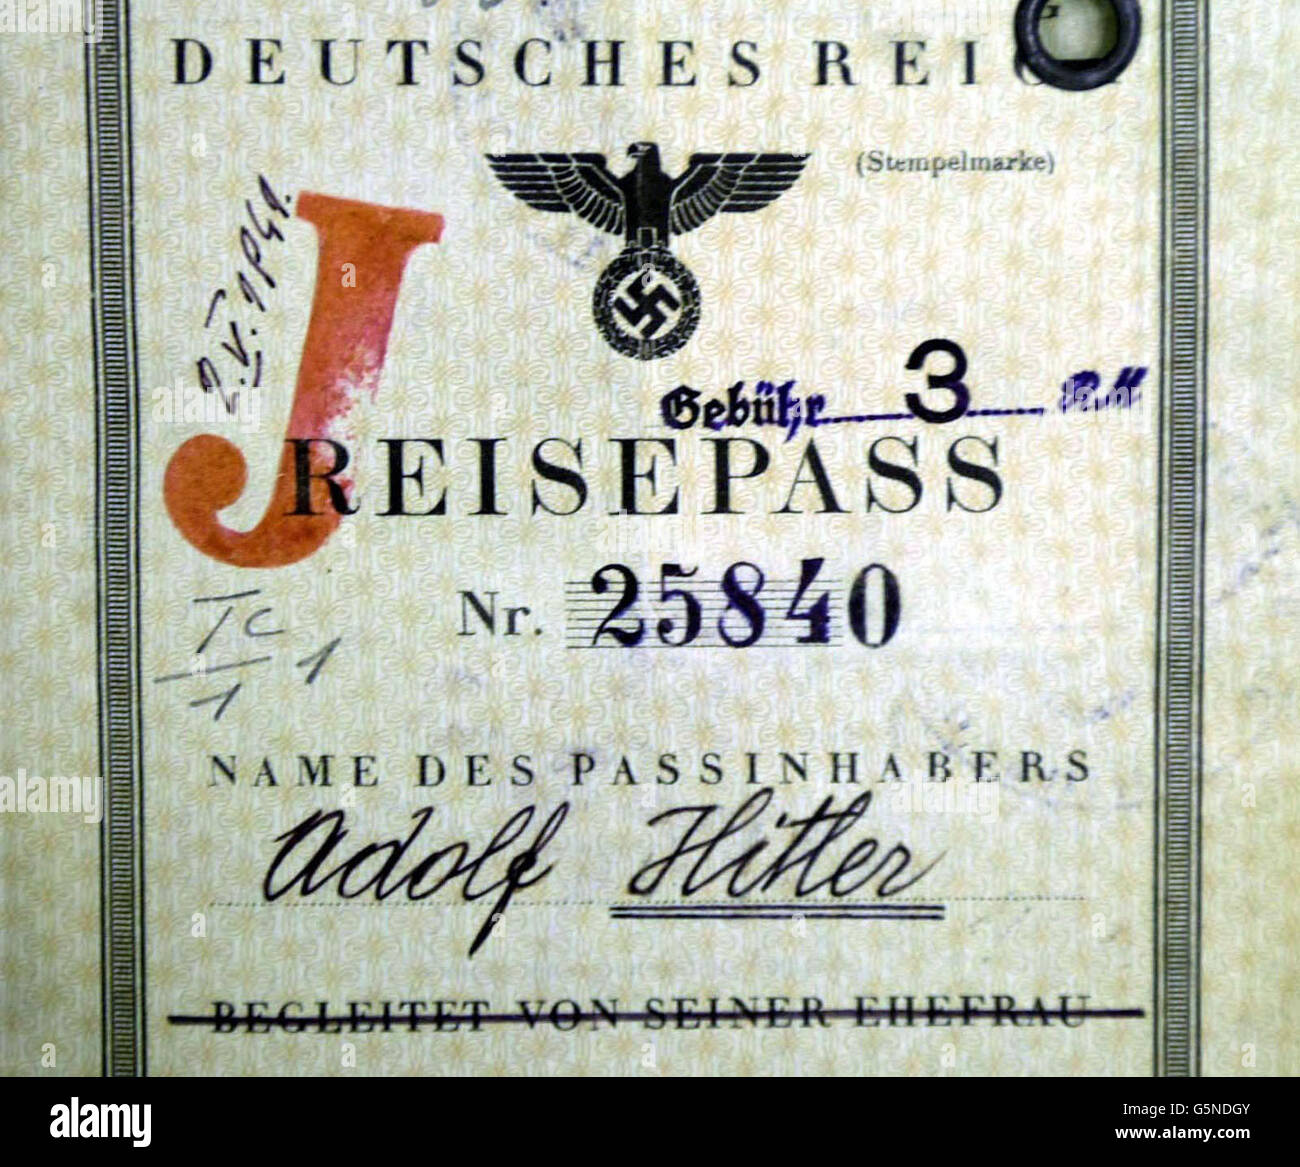 The faked passport of Adolf Hitler ironically stamped on the outside with a large 'J' to denote that he was Jewish which was made during the Second World War by the Special Operations Executive (SOE) and released to the public for the first time at the Public Record Offic. * in Kew, London. The passport was revealed along with other secret documents kept by the Special Operations Executive (SOE) which included Bulgarian firearms licences, Greek travel permits and Croatian fishing licences. The passport shows the expertise required by professional forgers during the conflict to provide British Stock Photo